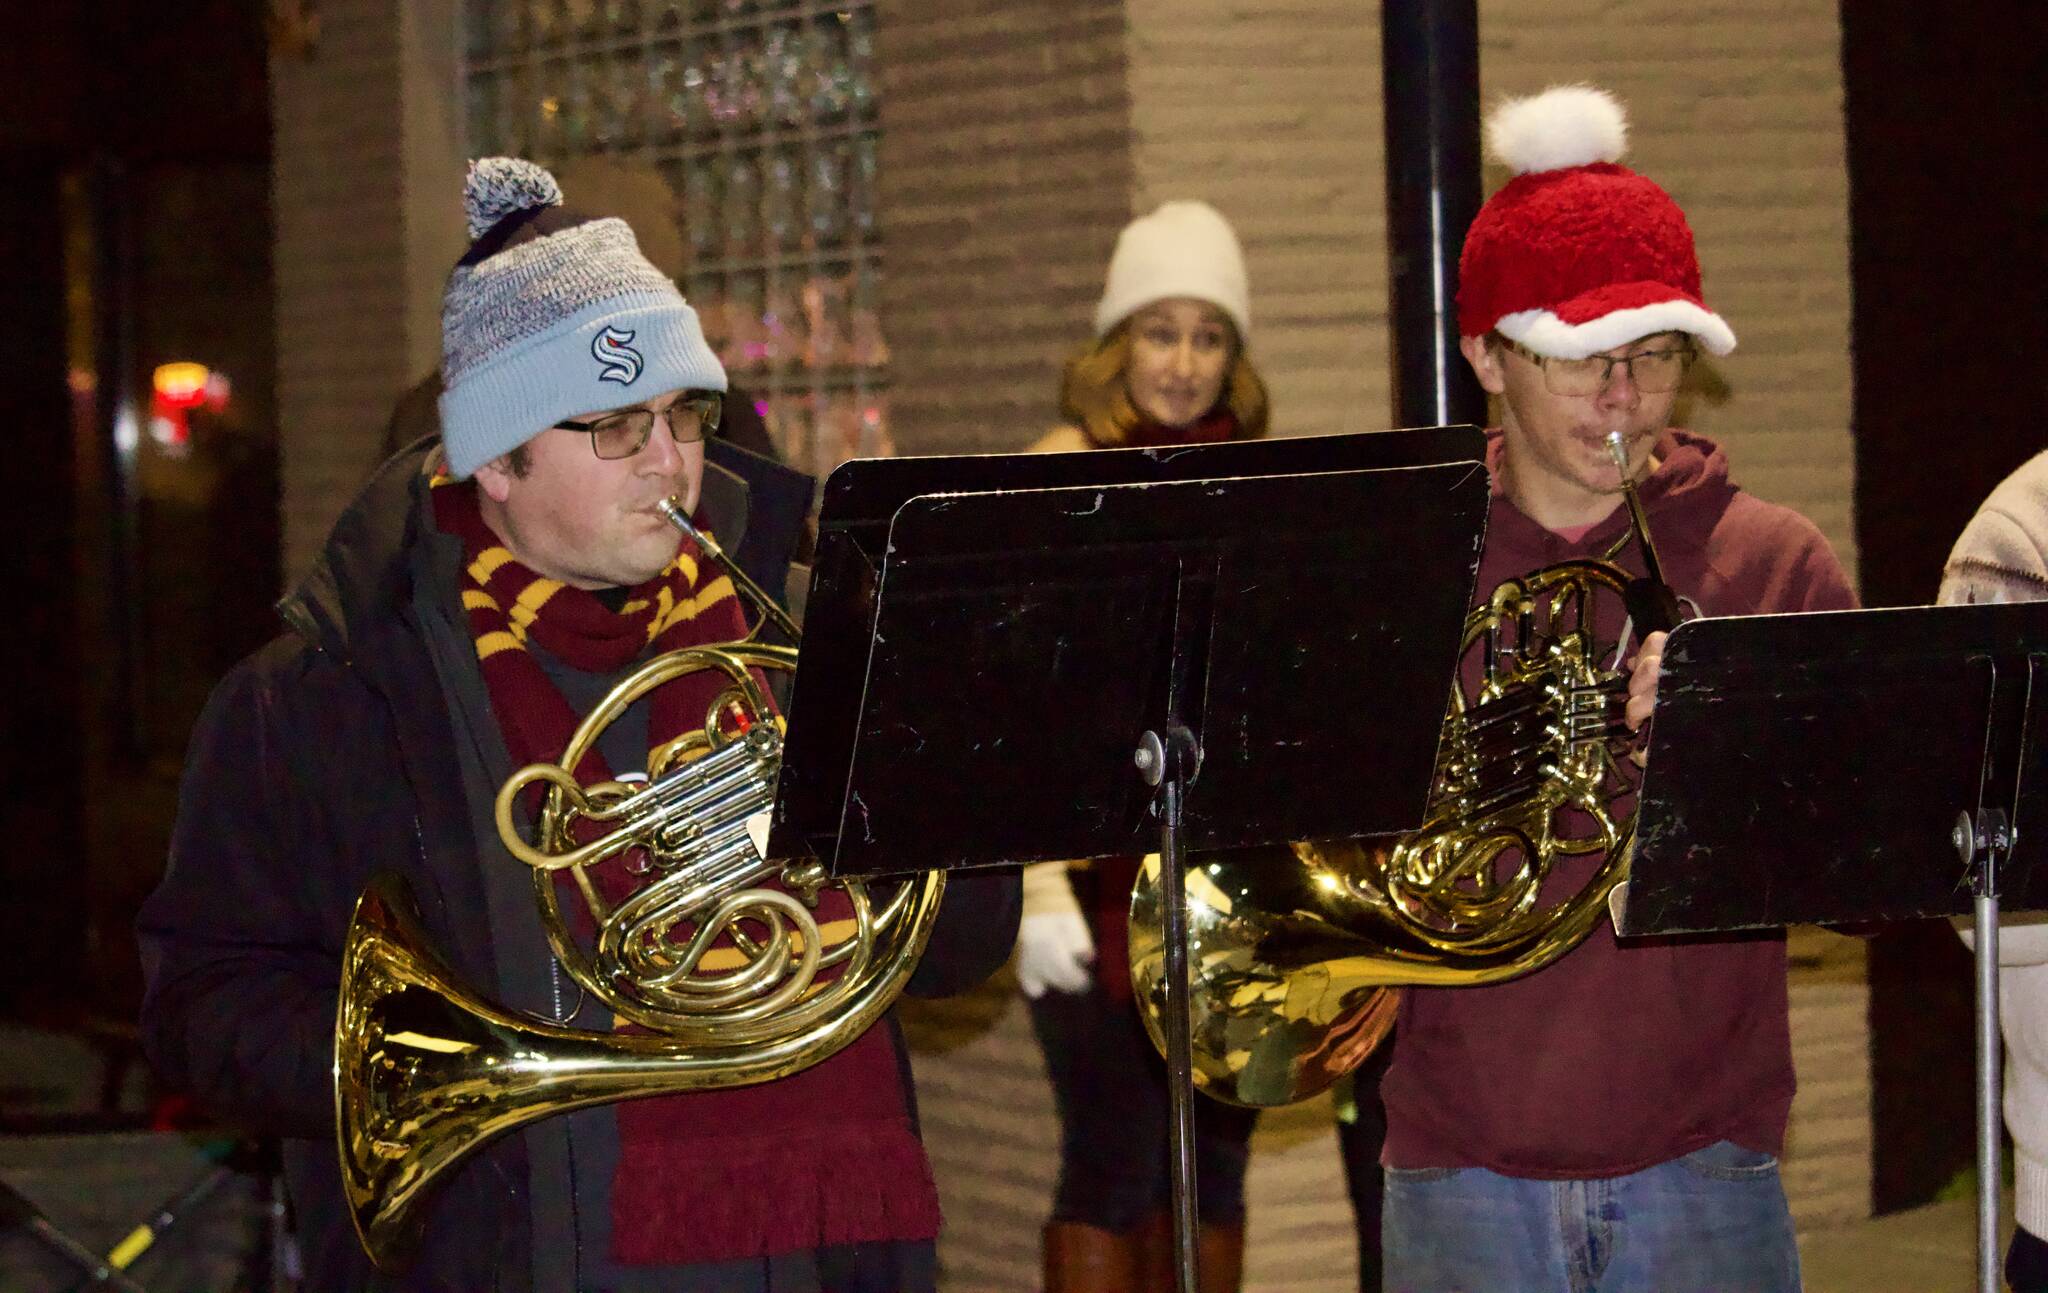 Photo by Rachel Rosen/Whidbey News-Times
French hornists Sean Brown and Ethan Brady play Christmas songs in downtown Oak Harbor.